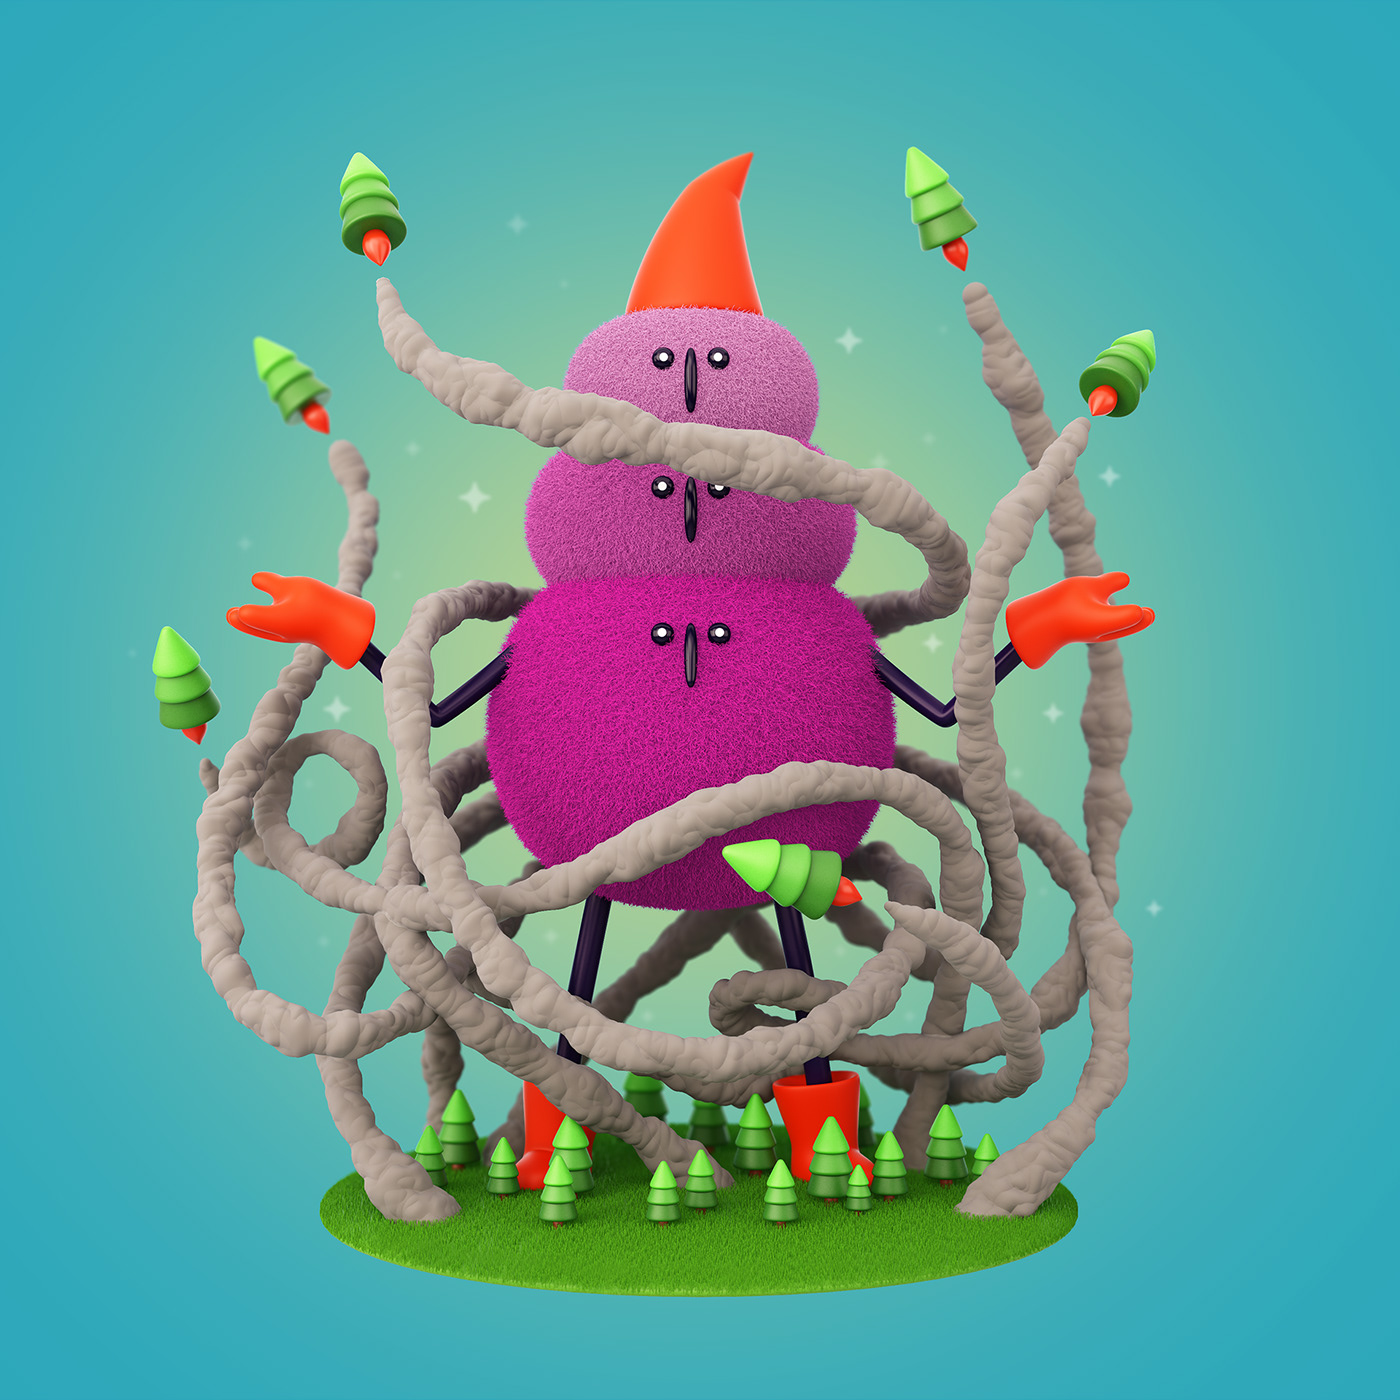 3D 3D Character artwork Character design  color fluffy ILLUSTRATION  Nature toy design  Wizards